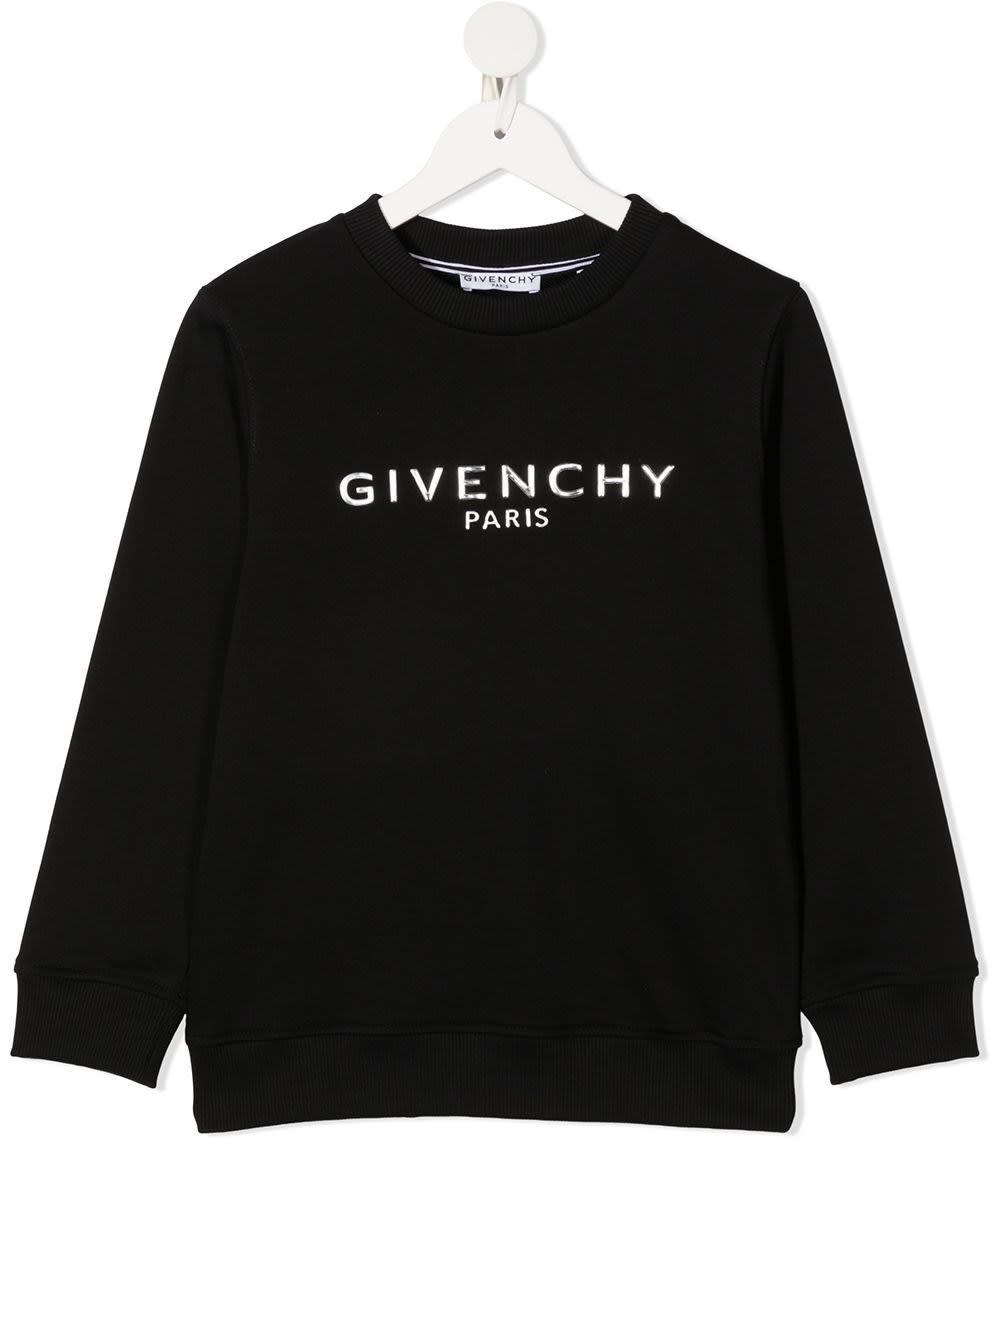 GIVENCHY COTTON SWEATSHIRT WITH LOGO,11857832